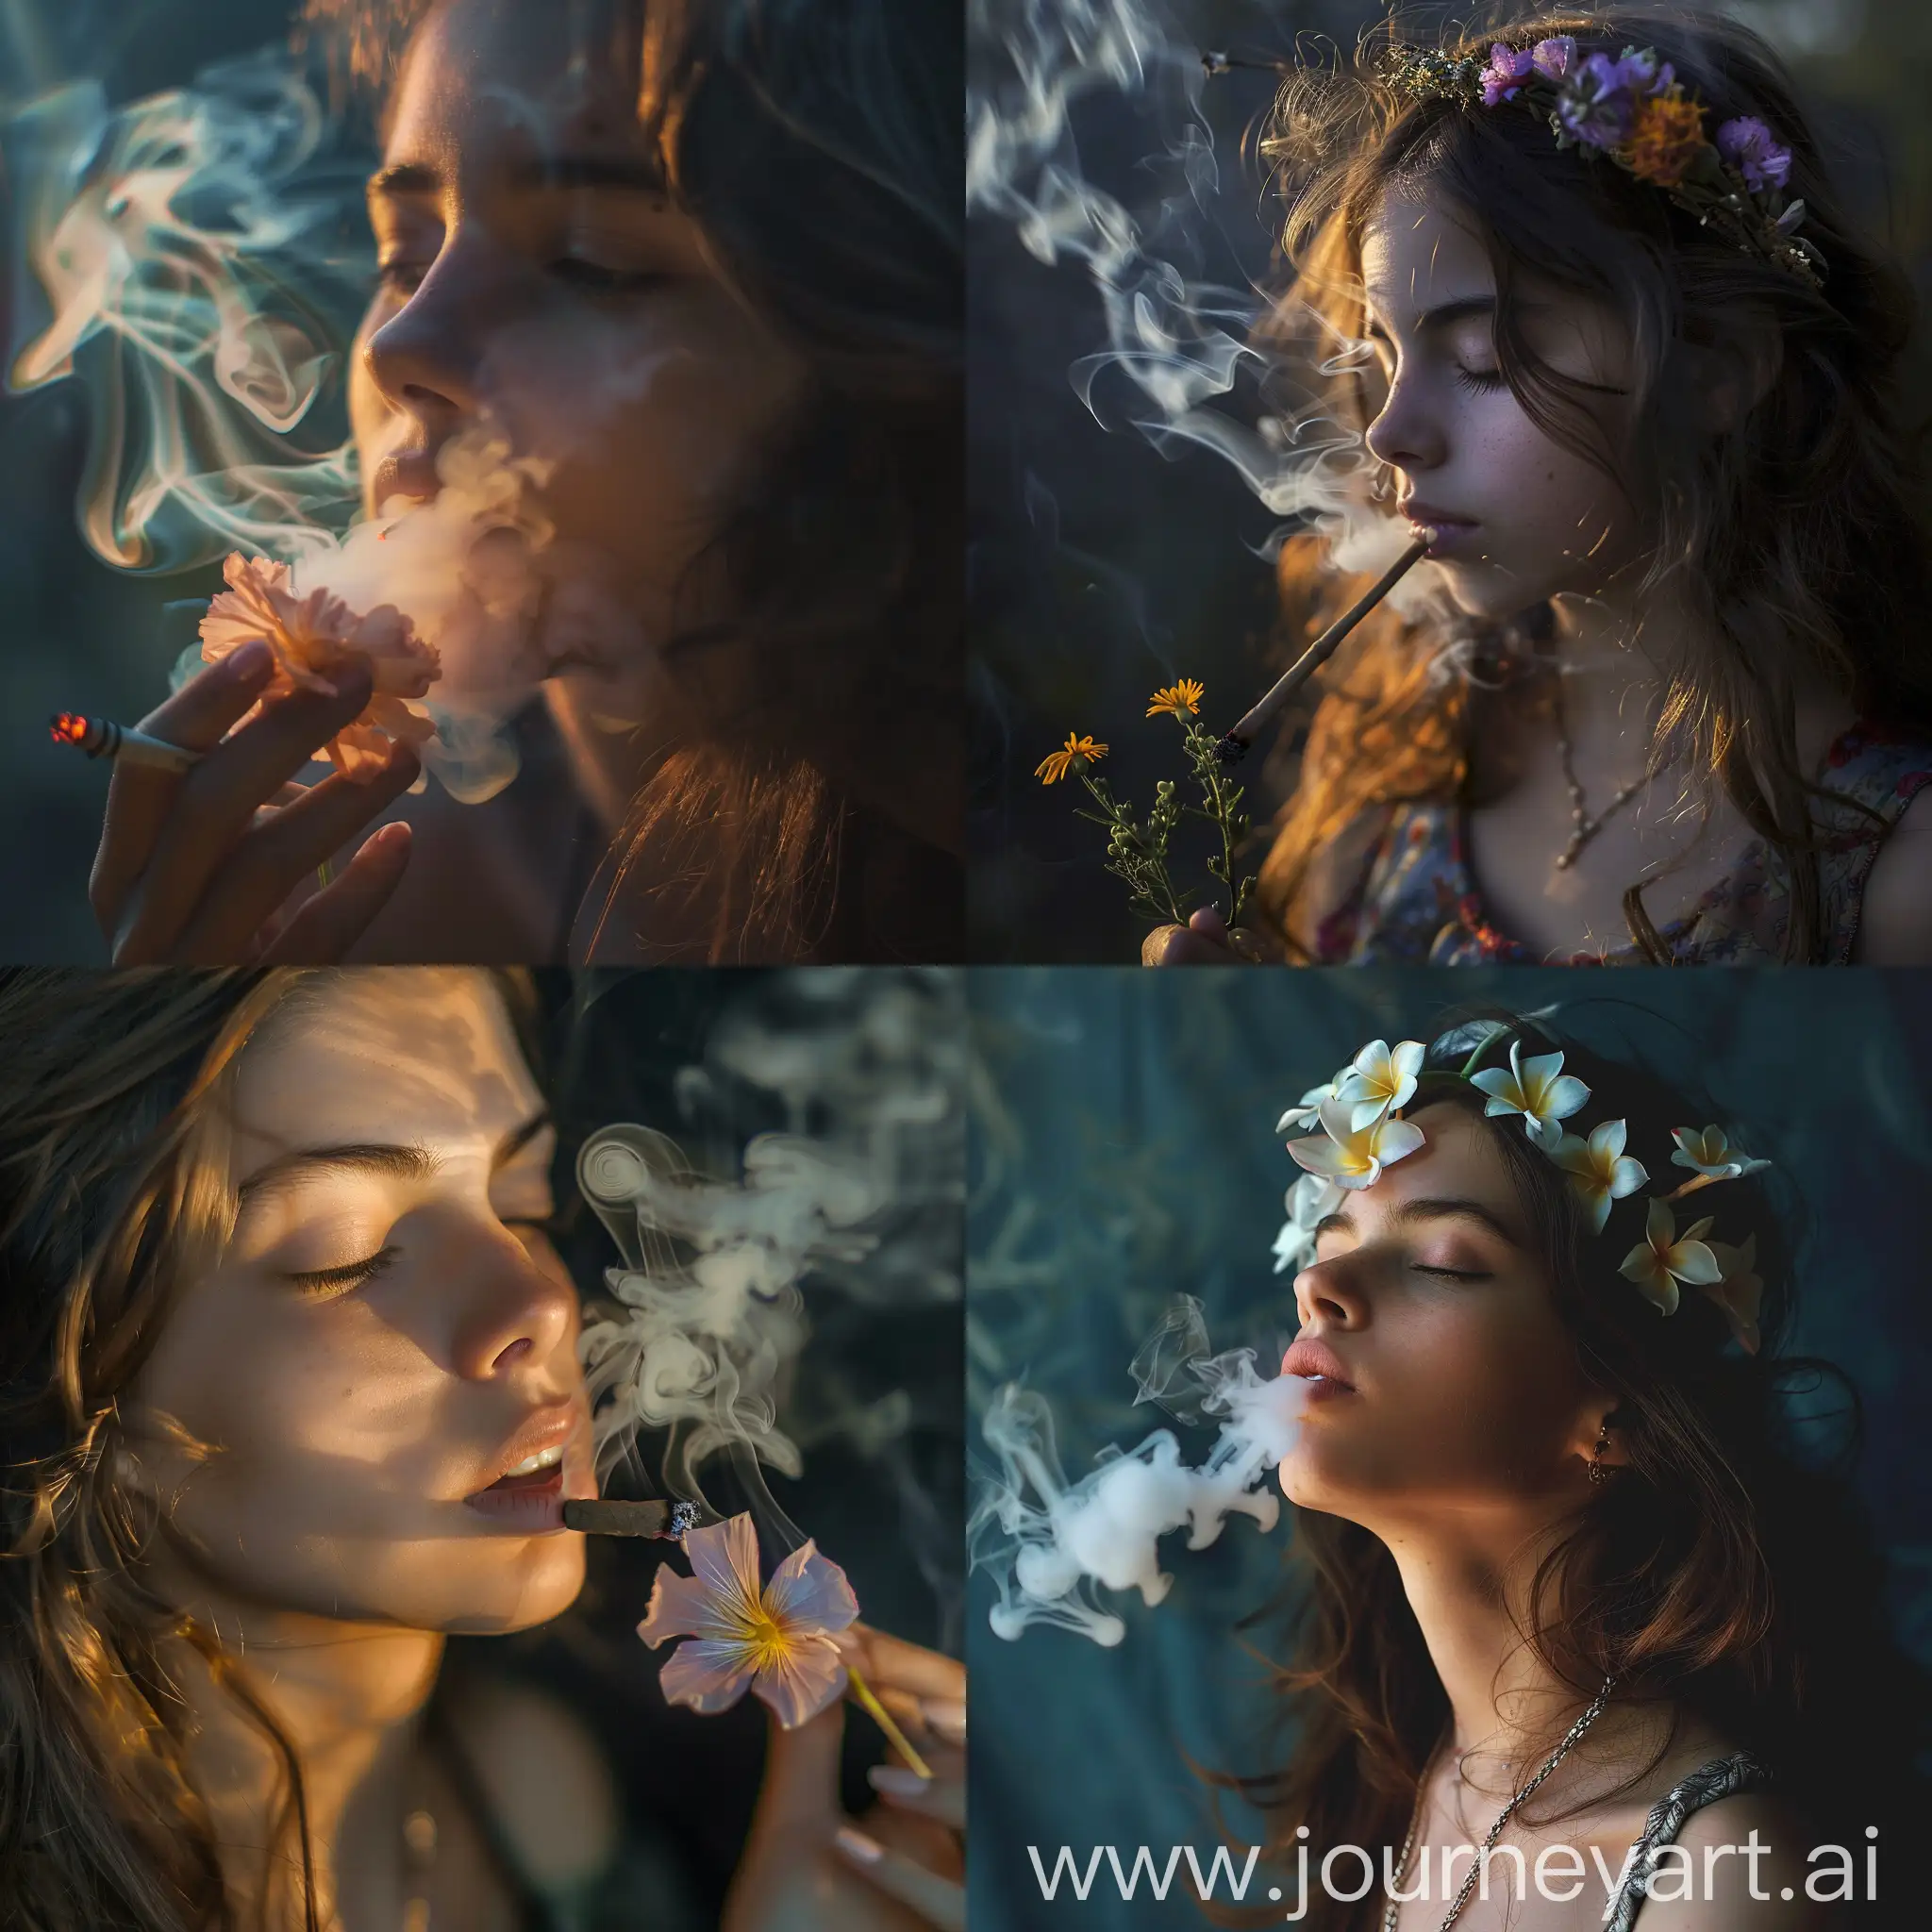 Girl-Smoking-Flower-Expressive-Artistic-Portrait-with-Floral-Theme